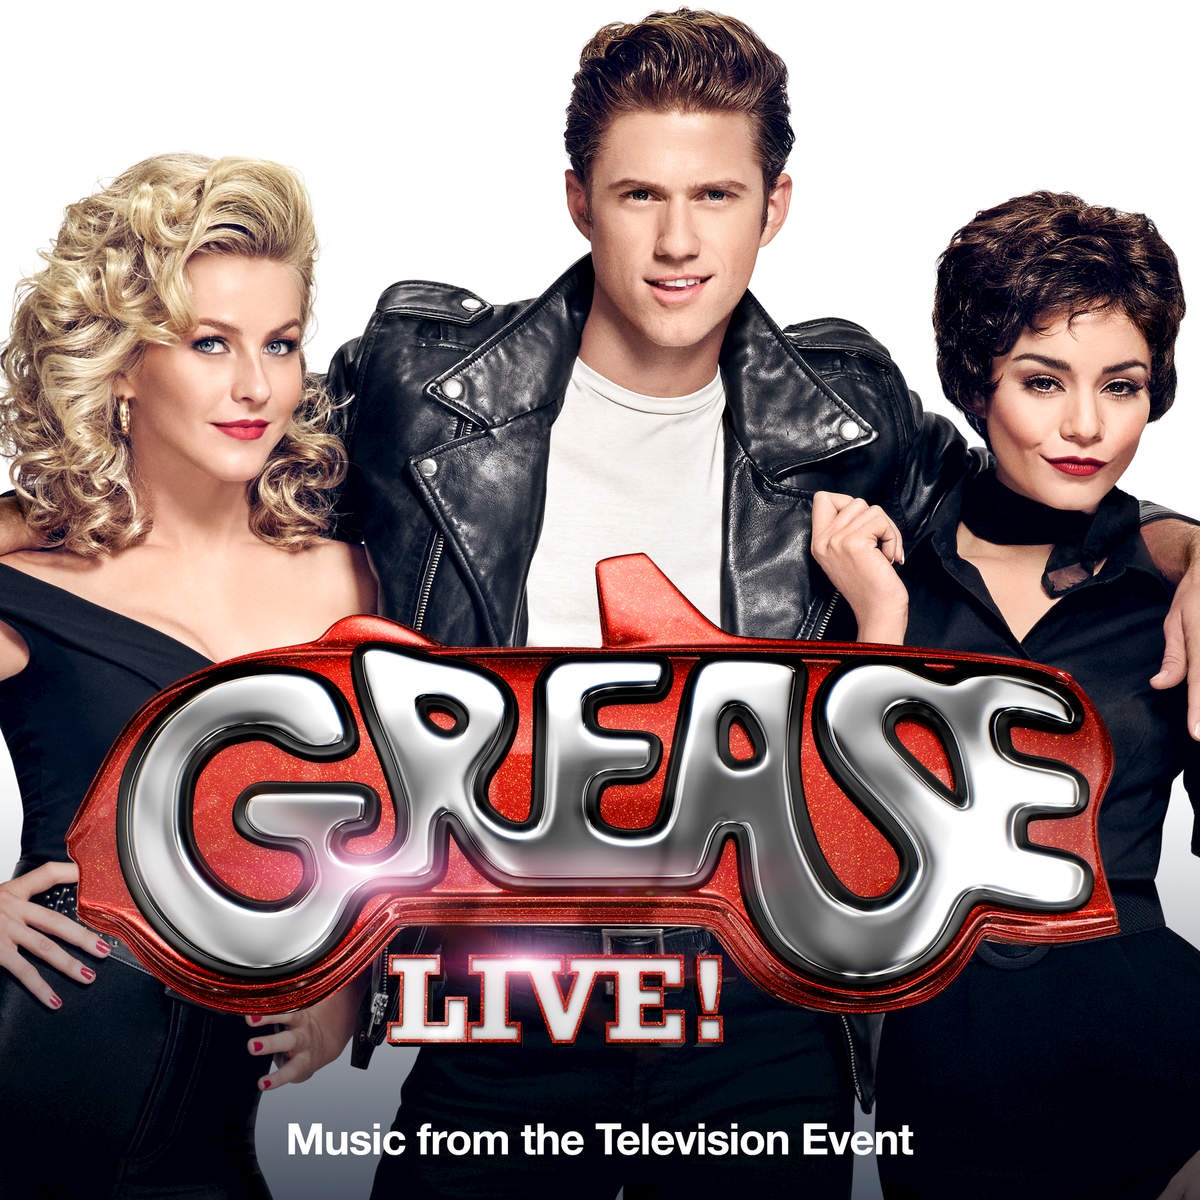 Summer Nights - From "Grease Live!" Music From The Television Event